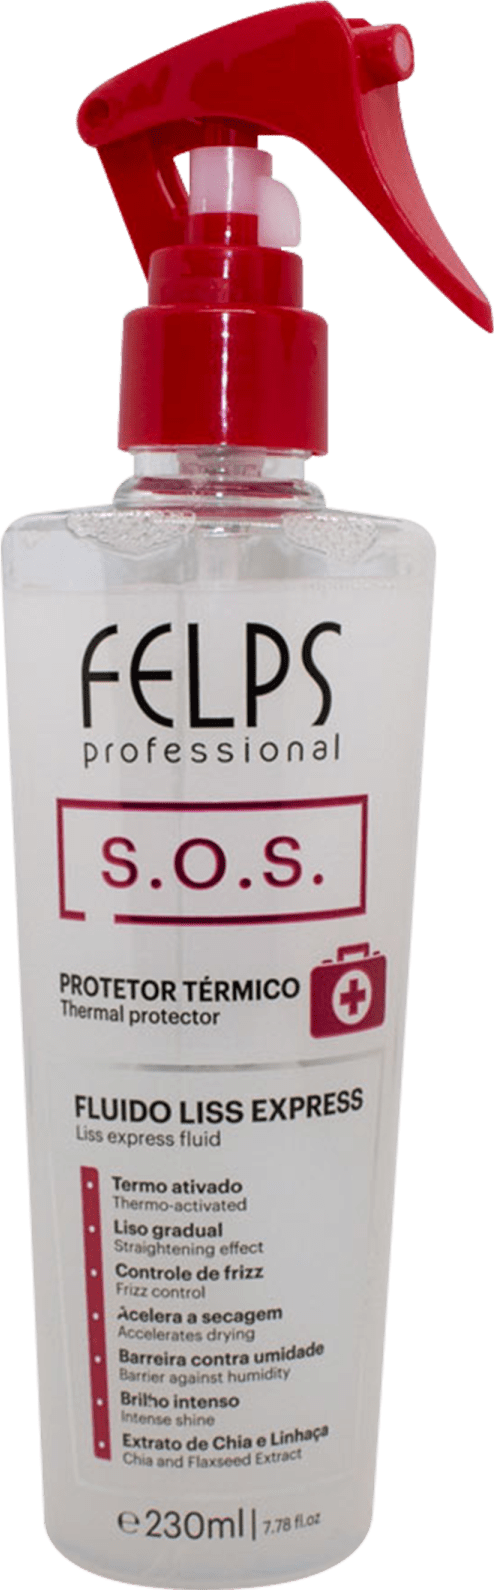 Felps Professional SOS Liss Express - Thermal Protective Fluid 230ml/7.78 fl.oz